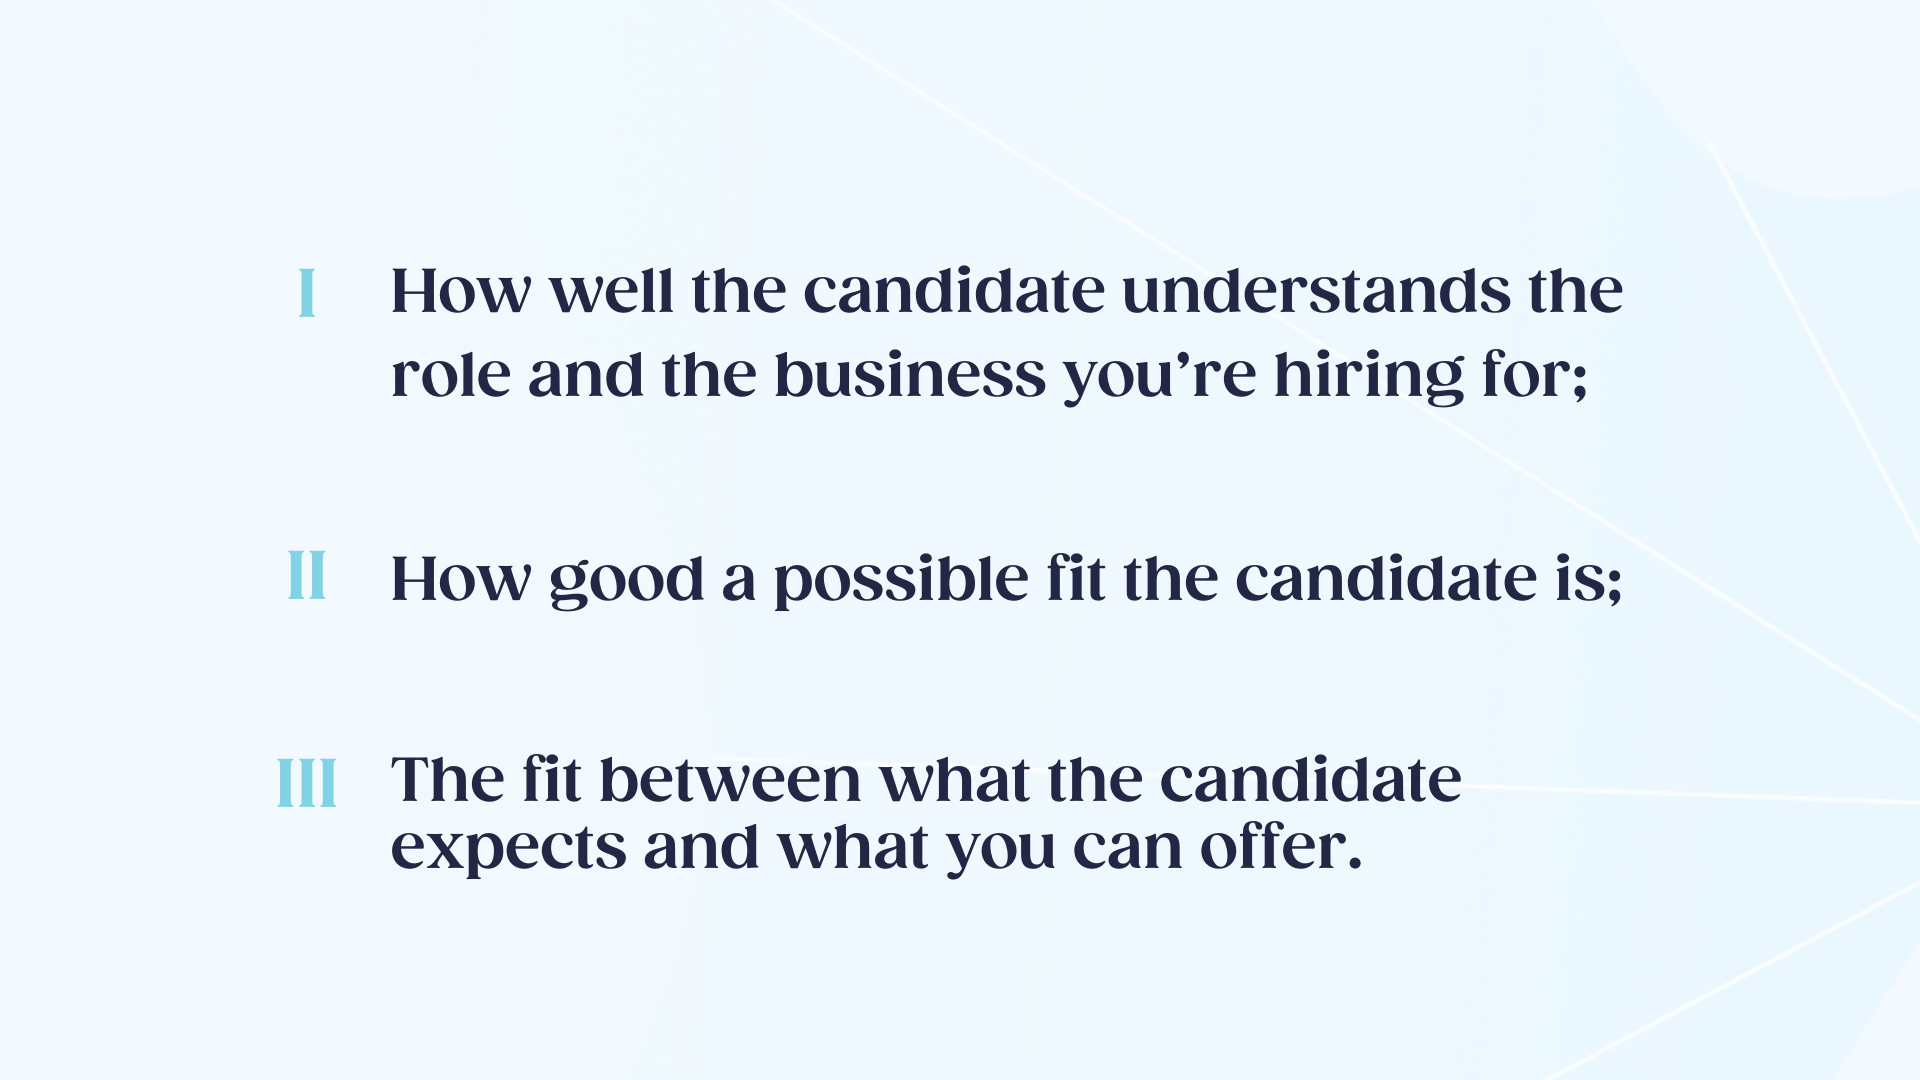 job fit meetings - step by step guide for hiring executives - Wisnio.png